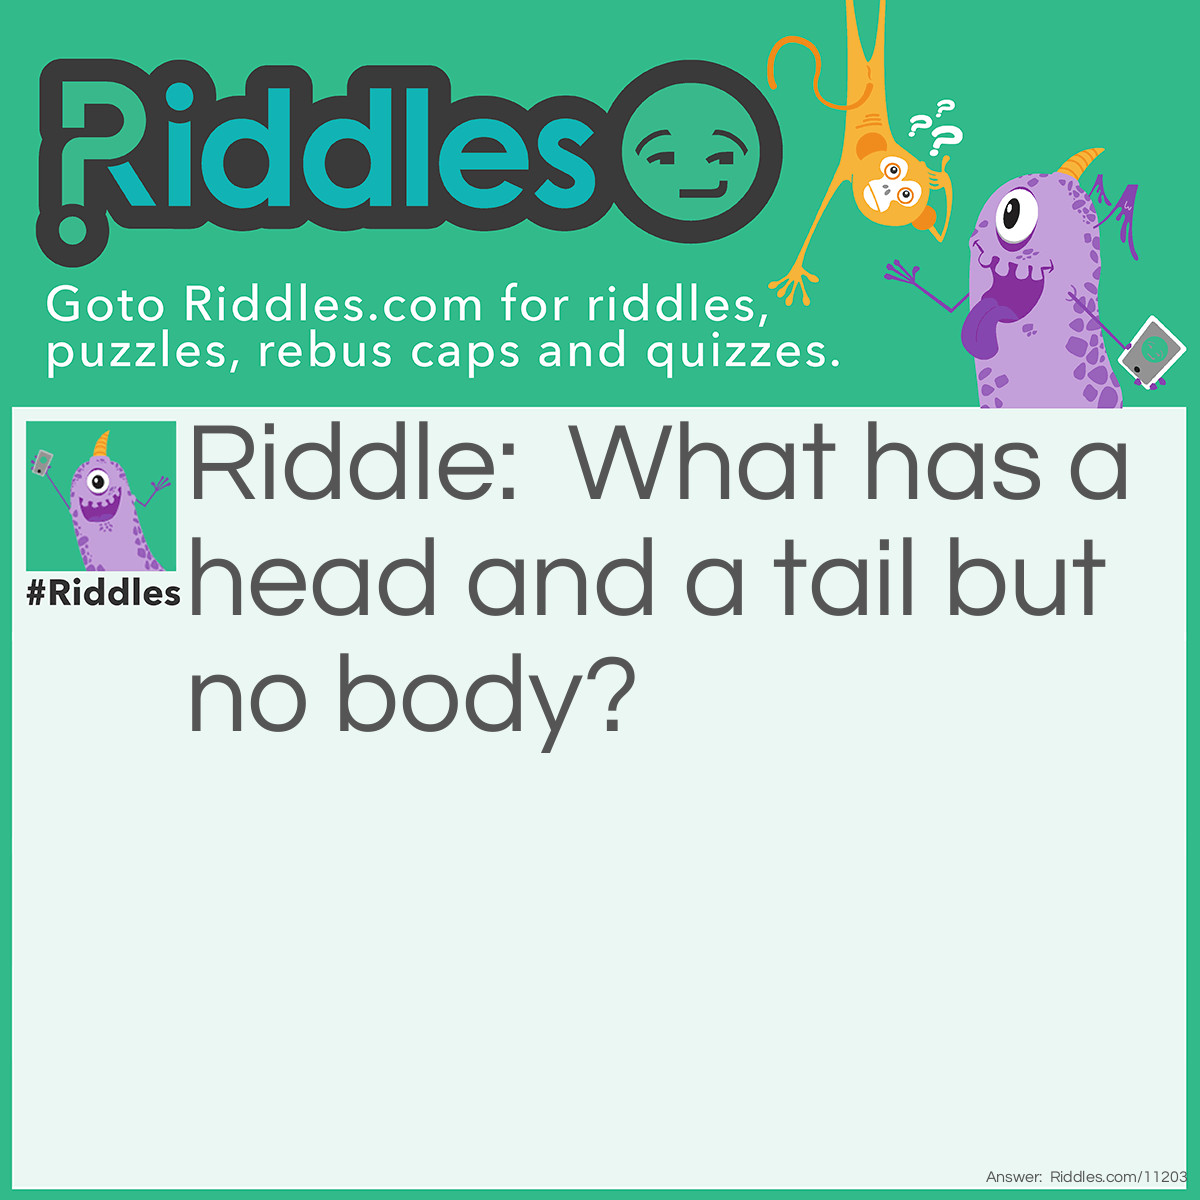 Riddle: What has a head and a tail but no body? Answer: The answer is a coin. It has a head and a tail but no body.